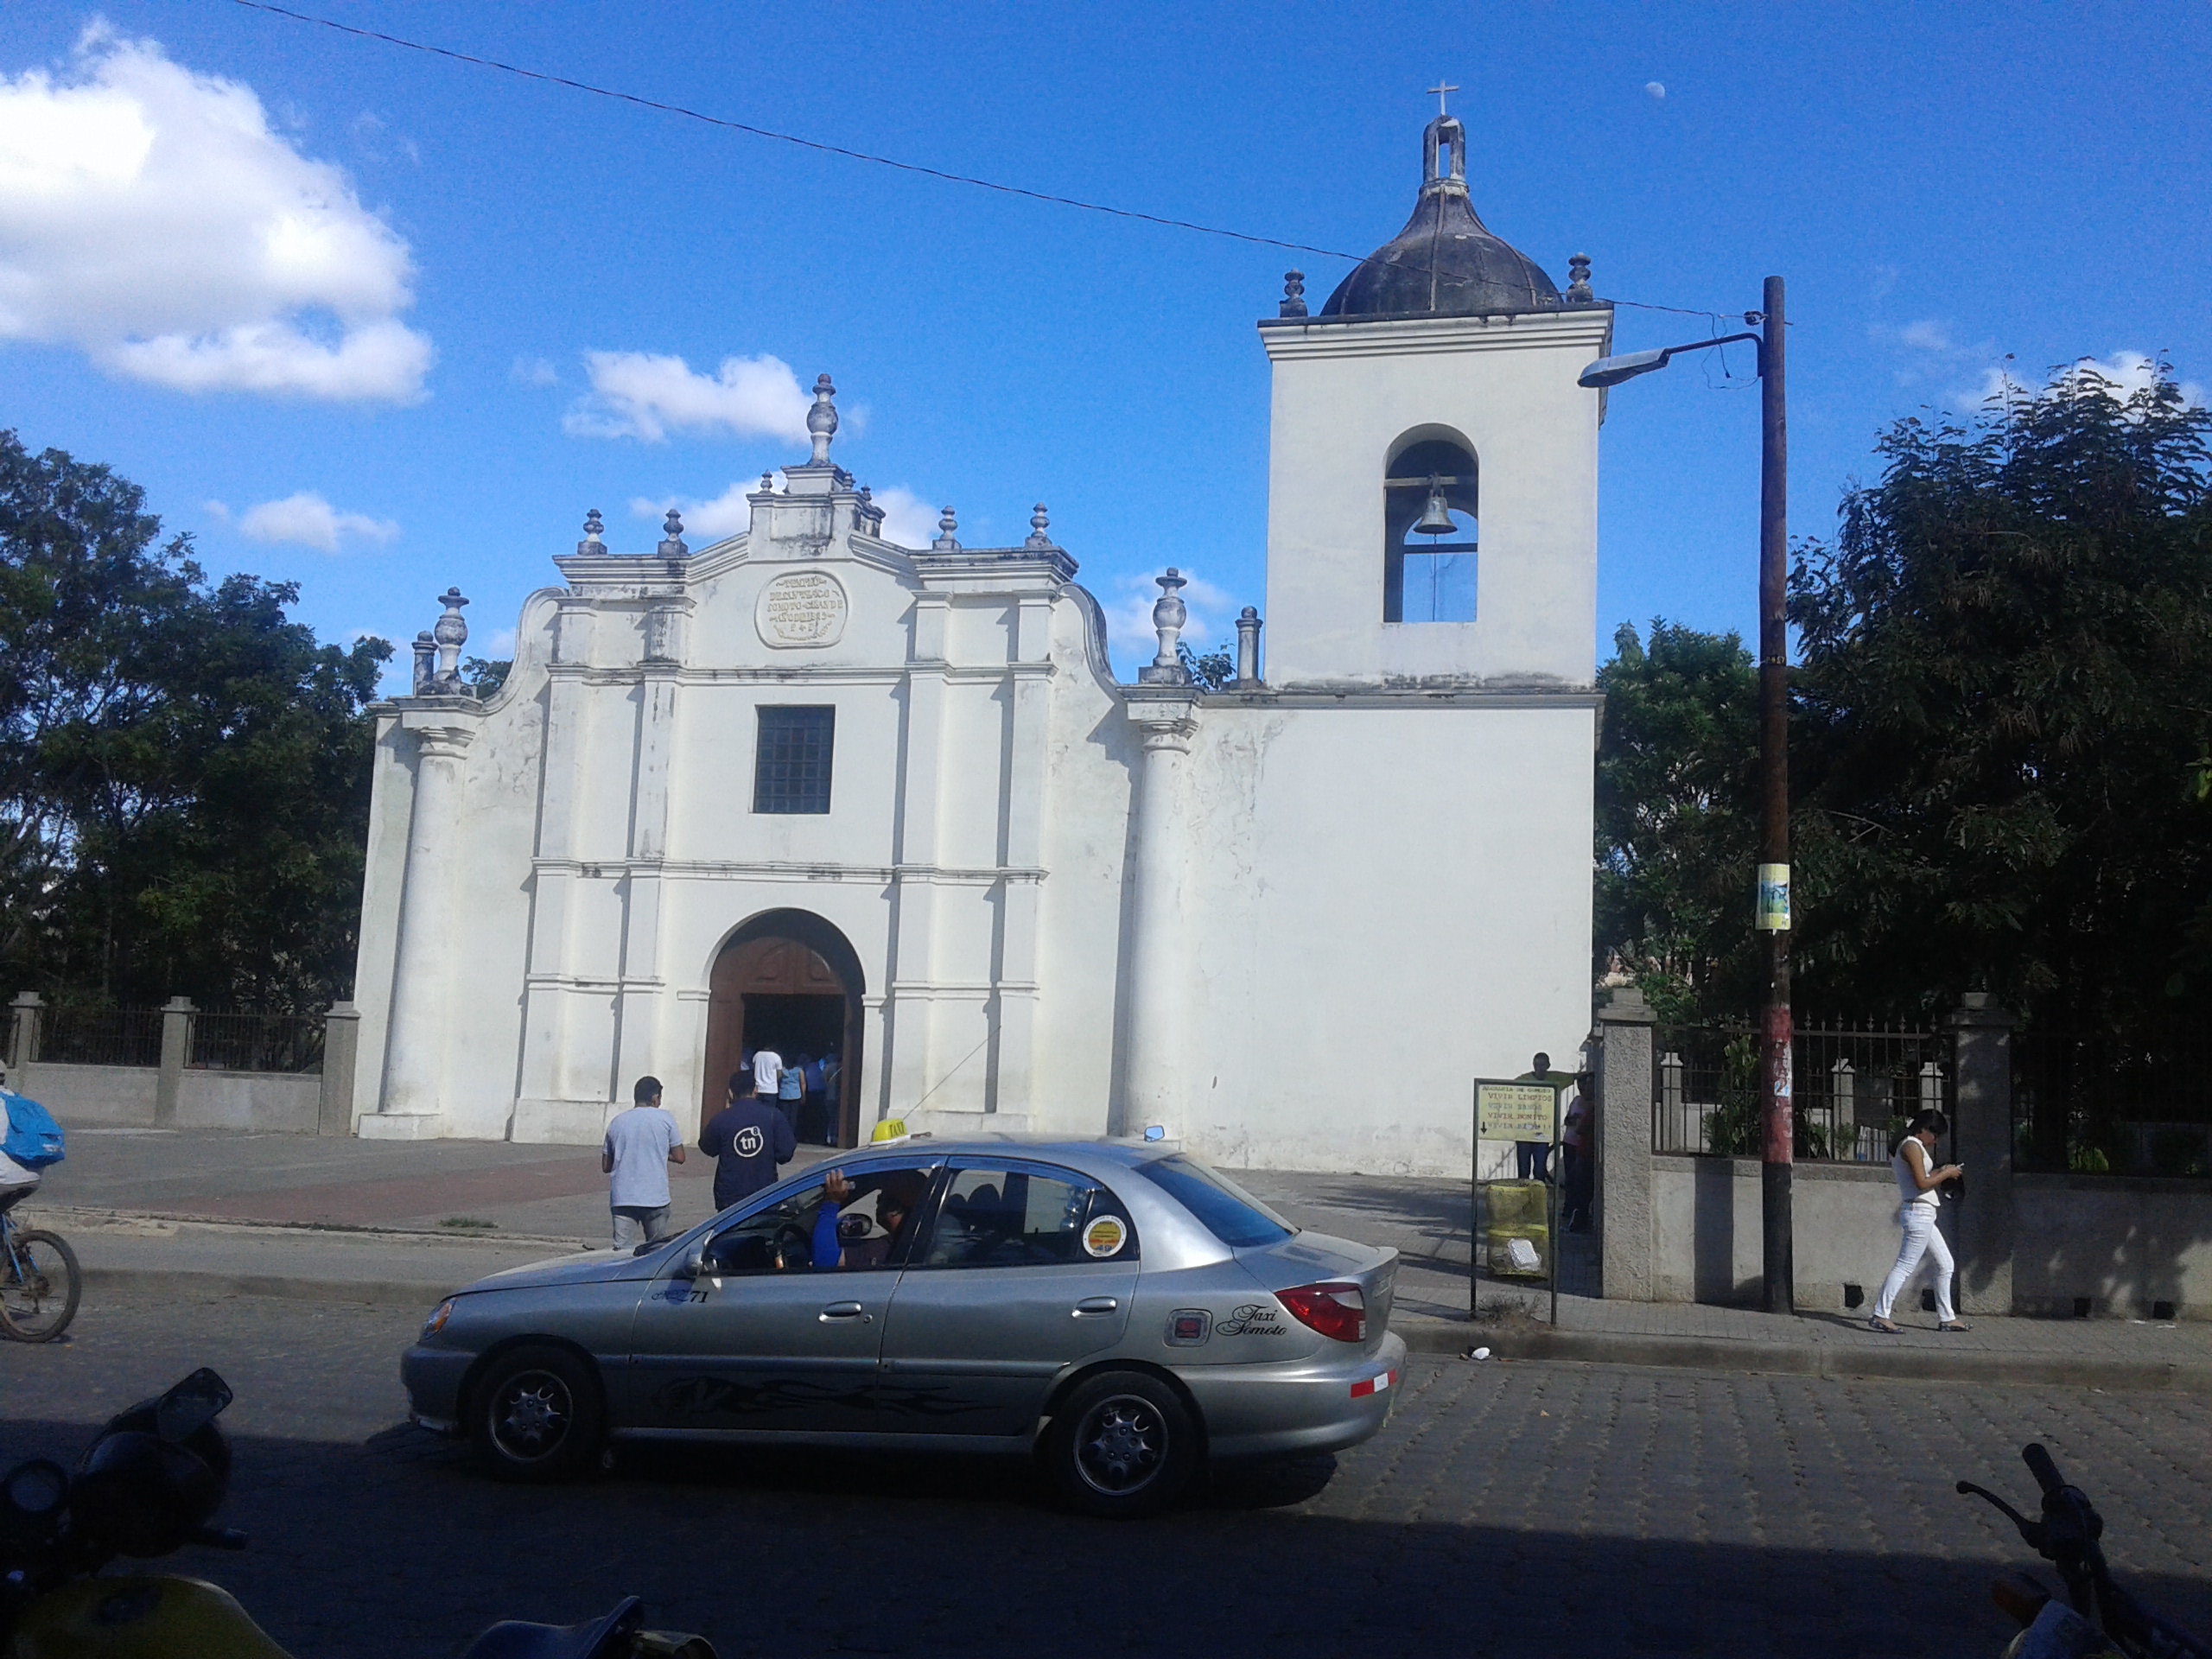 Dictatorship threatens Catholics from Las Segovias who attend temples and organize religious activities